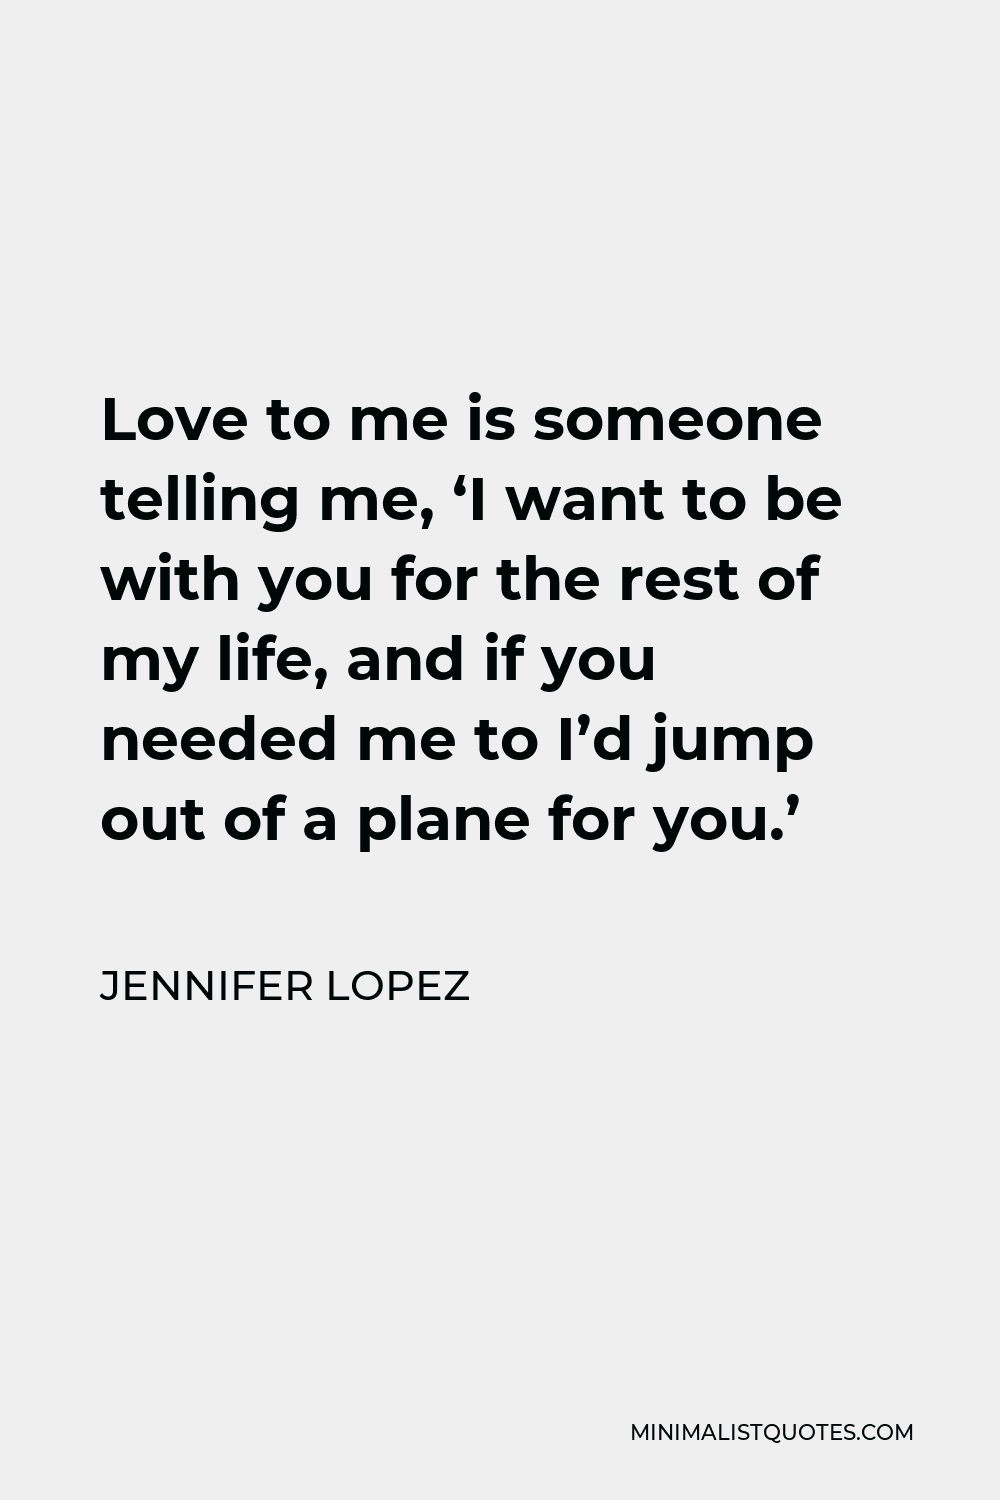 Jennifer Lopez Quote - Love to me is someone telling me, ‘I want to be with you for the rest of my life, and if you needed me to I’d jump out of a plane for you.’